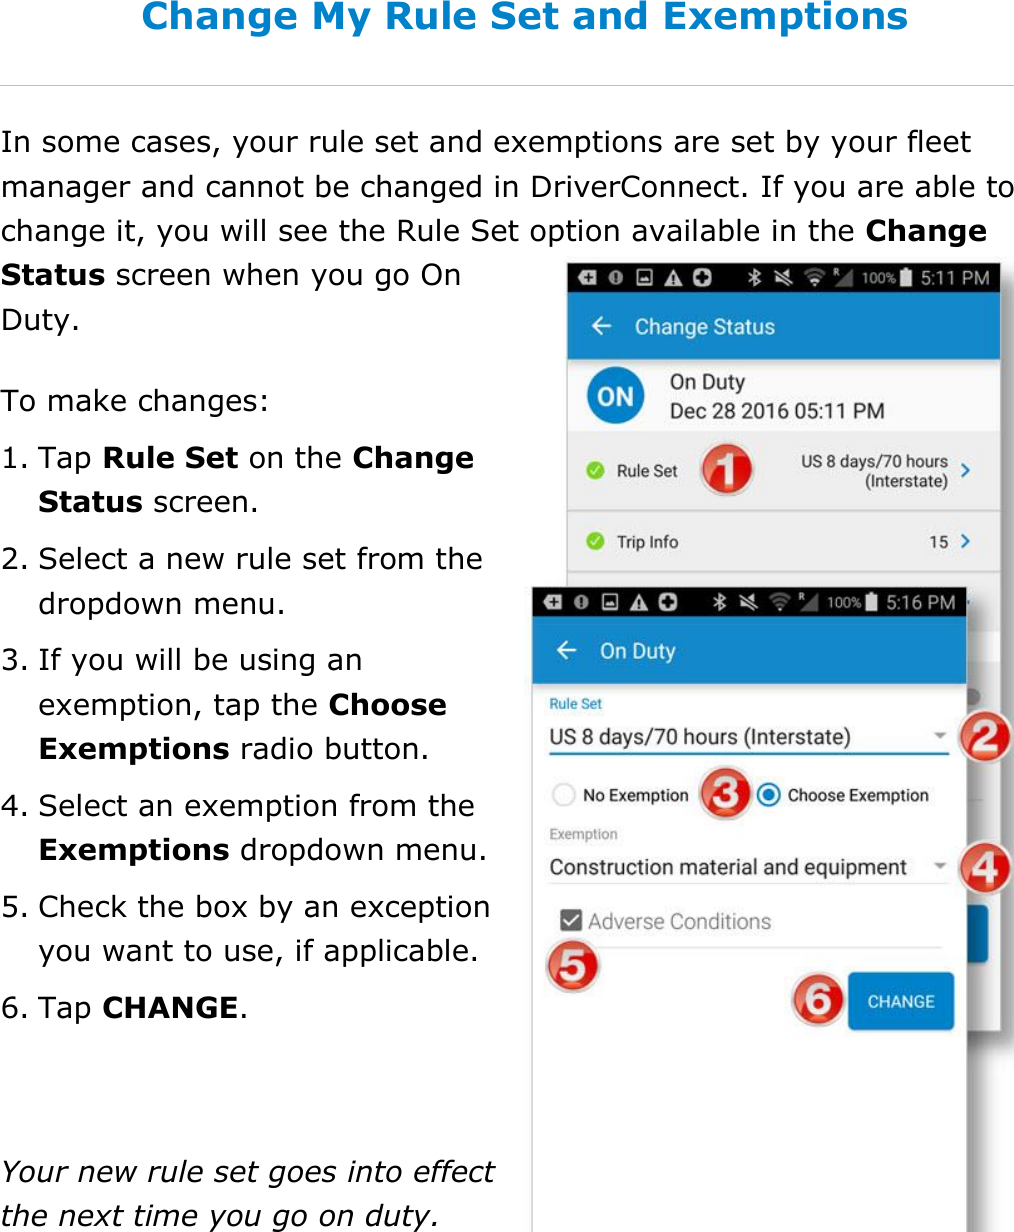  DriverConnect User Guide  85 © 2017, Rand McNally, Inc. Change My Rule Set and Exemptions In some cases, your rule set and exemptions are set by your fleet manager and cannot be changed in DriverConnect. If you are able to change it, you will see the Rule Set option available in the Change Status screen when you go On Duty. To make changes: 1. Tap Rule Set on the Change Status screen.  2. Select a new rule set from the dropdown menu. 3. If you will be using an exemption, tap the Choose Exemptions radio button. 4. Select an exemption from the Exemptions dropdown menu. 5. Check the box by an exception you want to use, if applicable. 6. Tap CHANGE.  Your new rule set goes into effect the next time you go on duty.